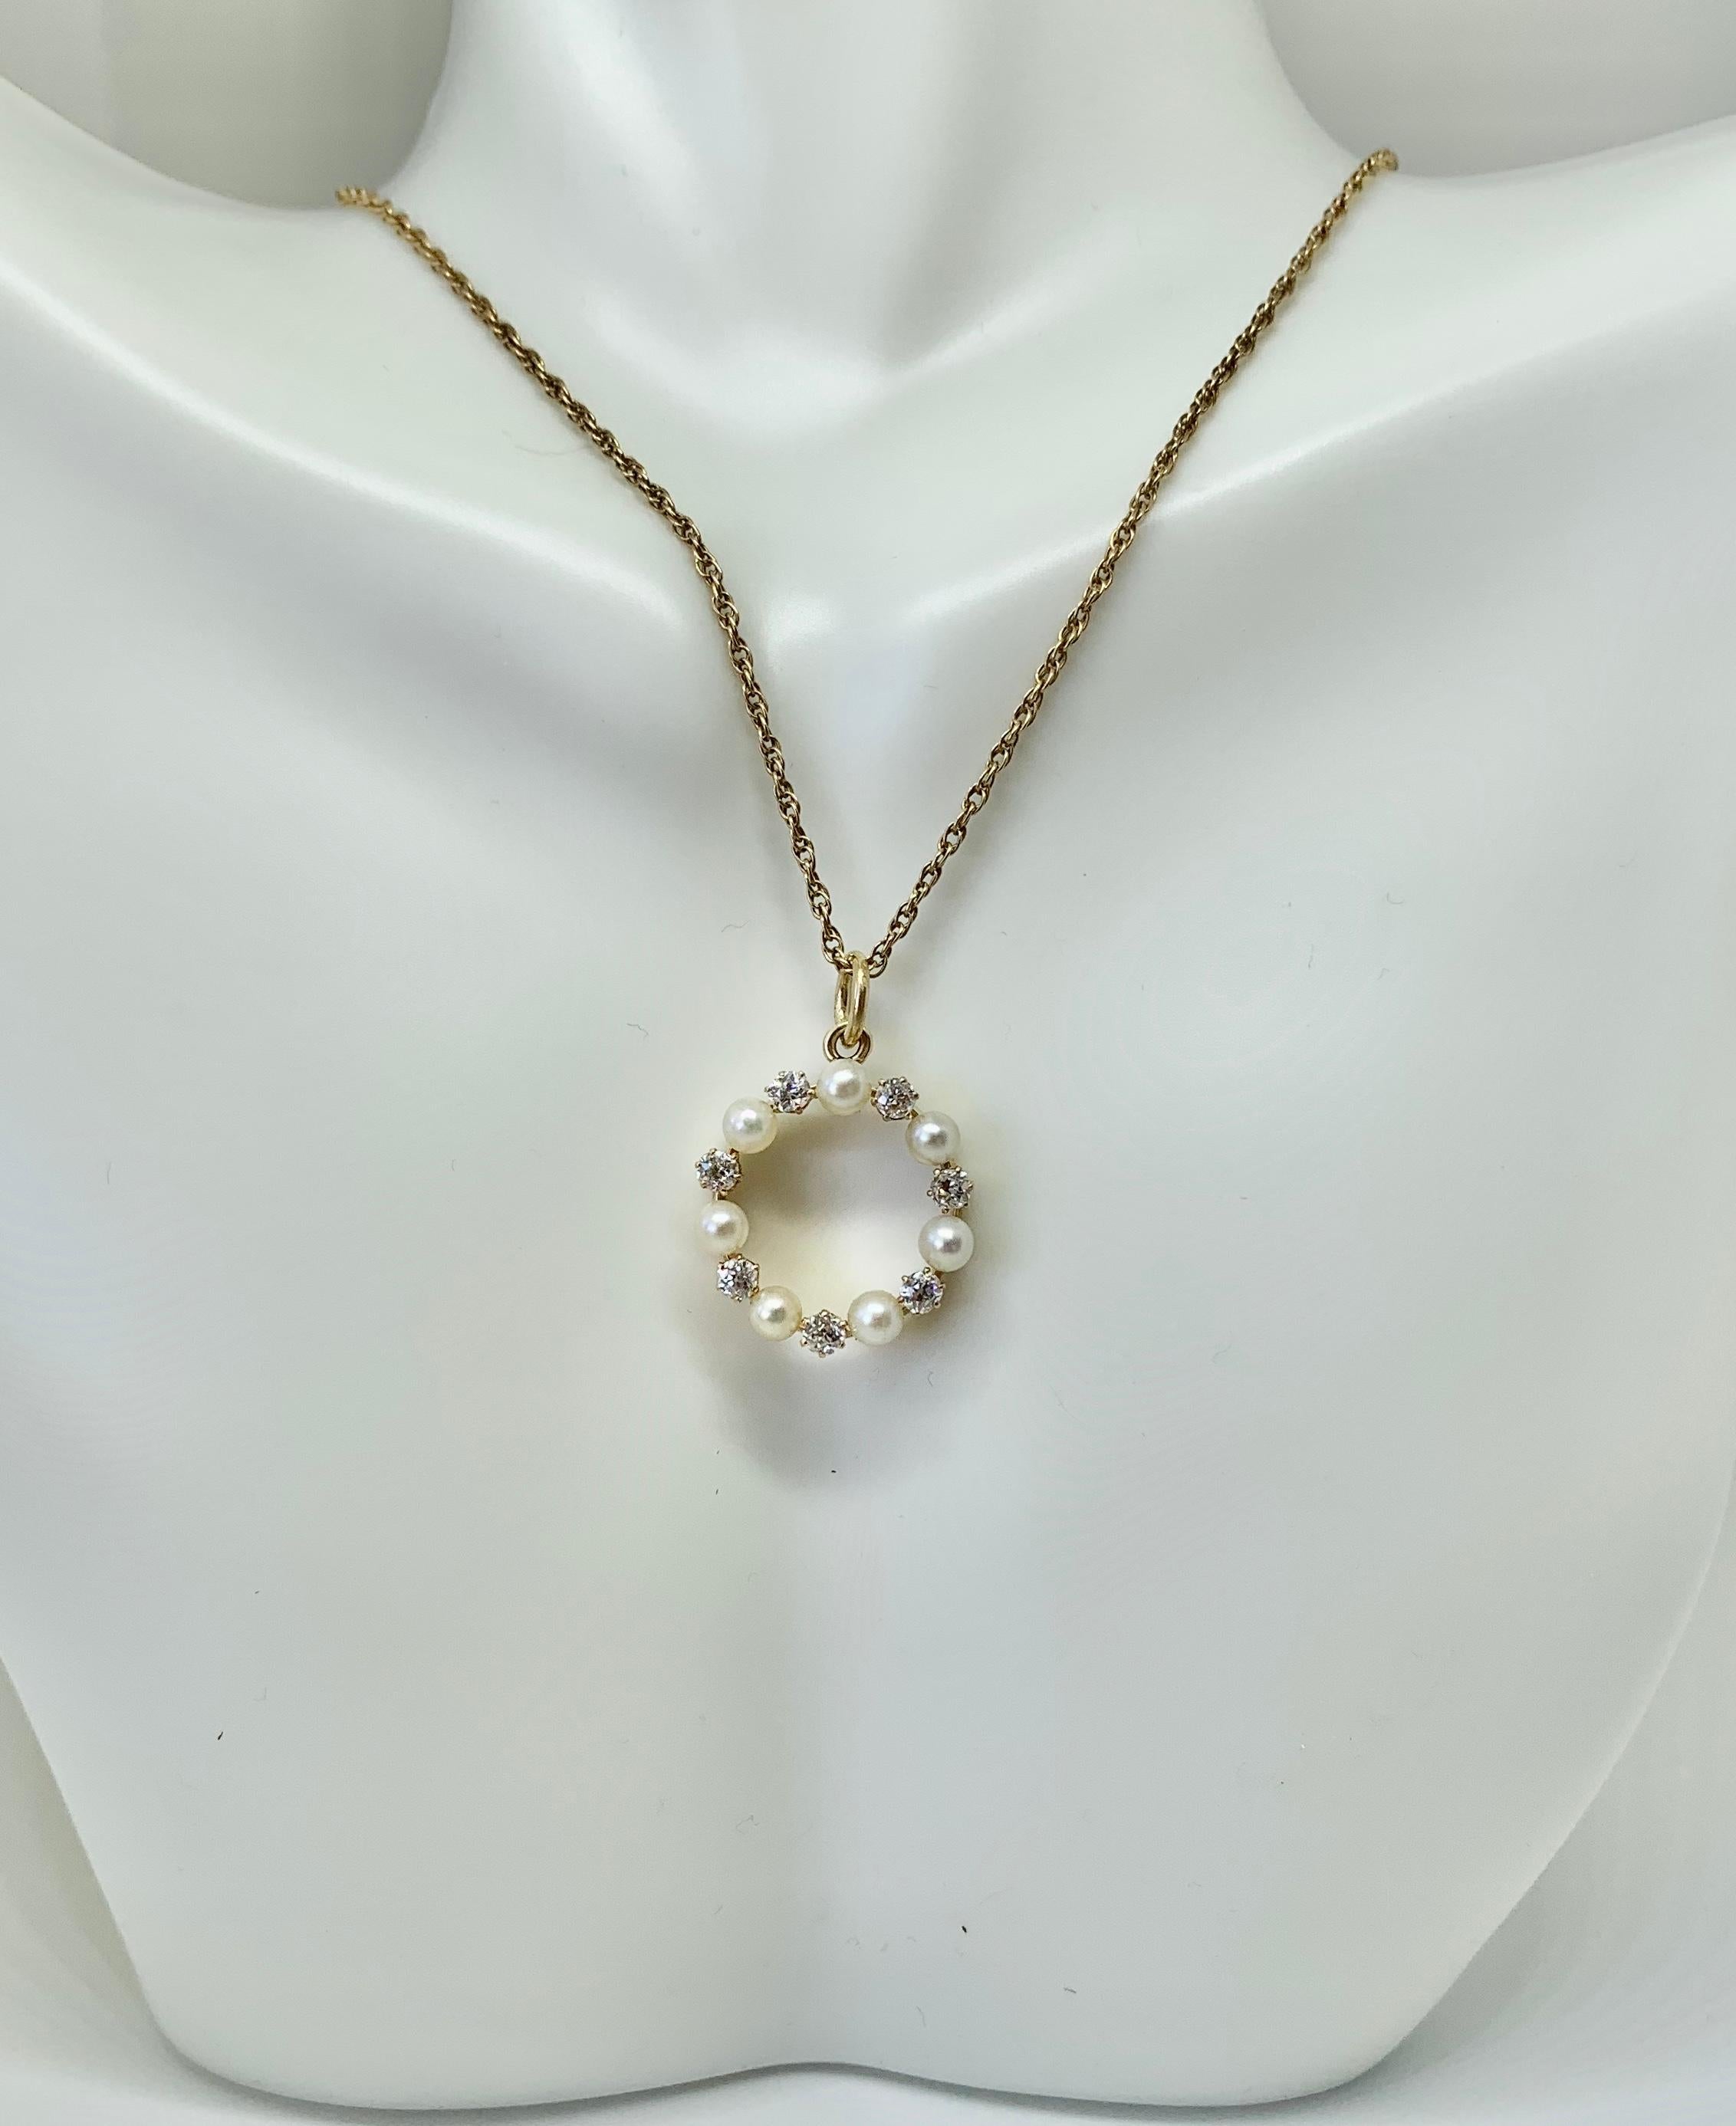 This is a beautiful antique Old Mine Cut Diamond and Pearl Victorian - Art Deco Circle Pendant.  The pendant is set with seven Old Mine Cut Diamonds of superb quality.  The antique diamonds are brilliantly white and approximately G-H color. They